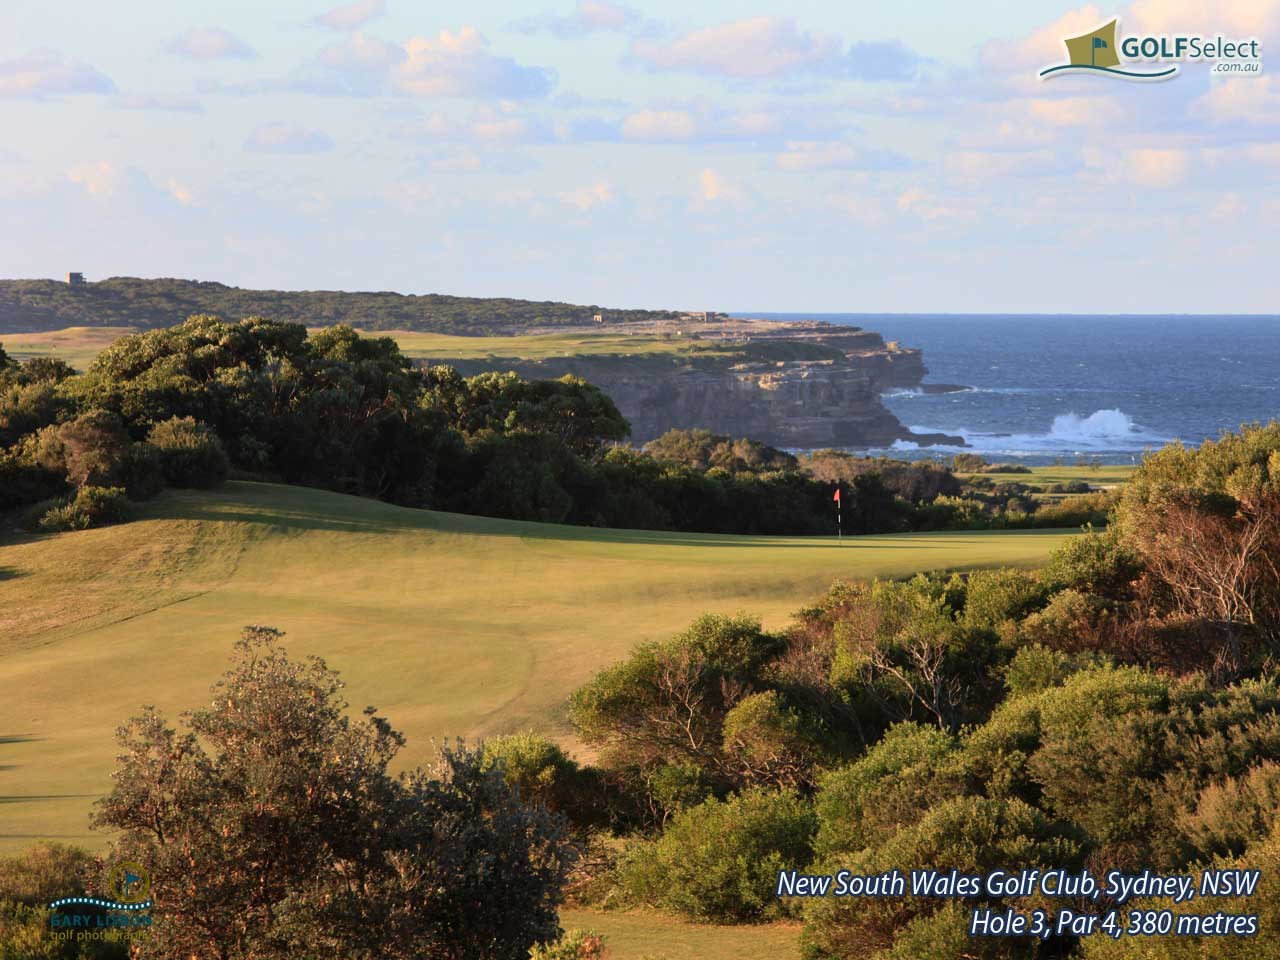 The New South Wales Golf Club Hole 3, Par 4, 380 metres